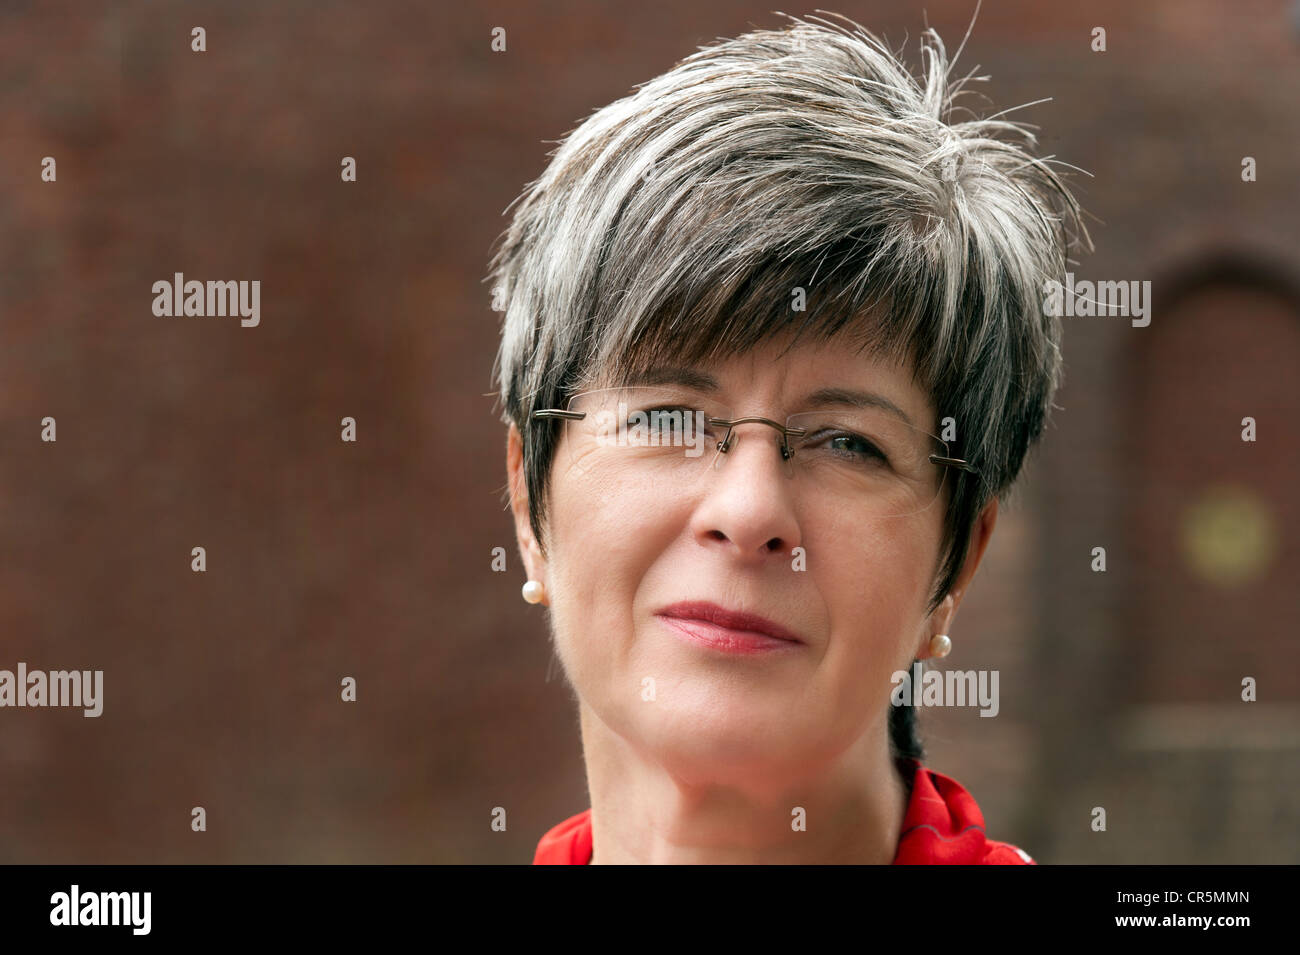 Woman, 50+, with short gray hair and glasses, portrait Stock Photo